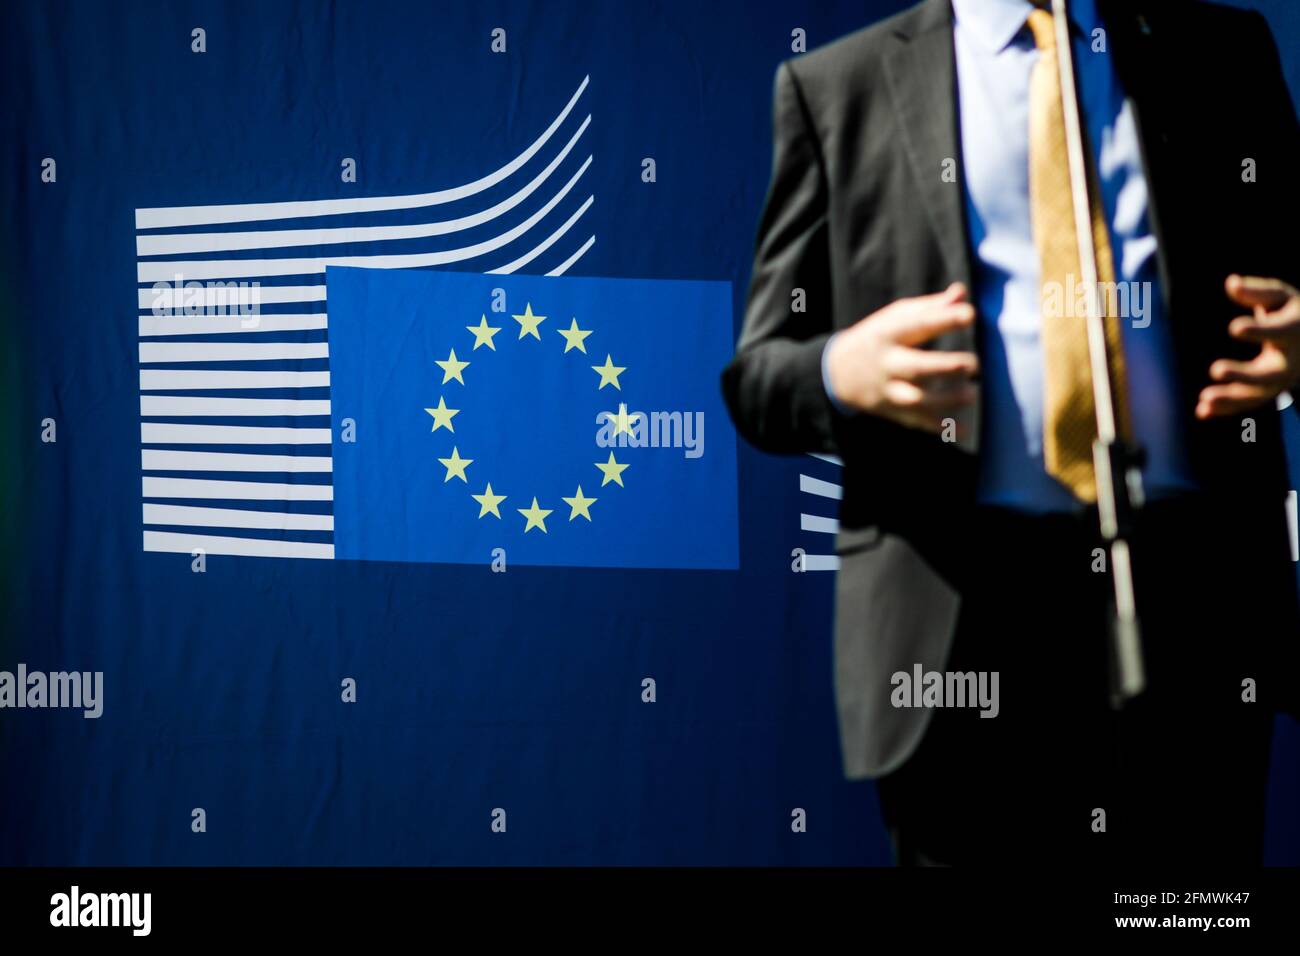 Bucharest, Romania - May 9, 2021: Details with the European Commission logo on the background while a politician holds a speech during Europe Day, on Stock Photo